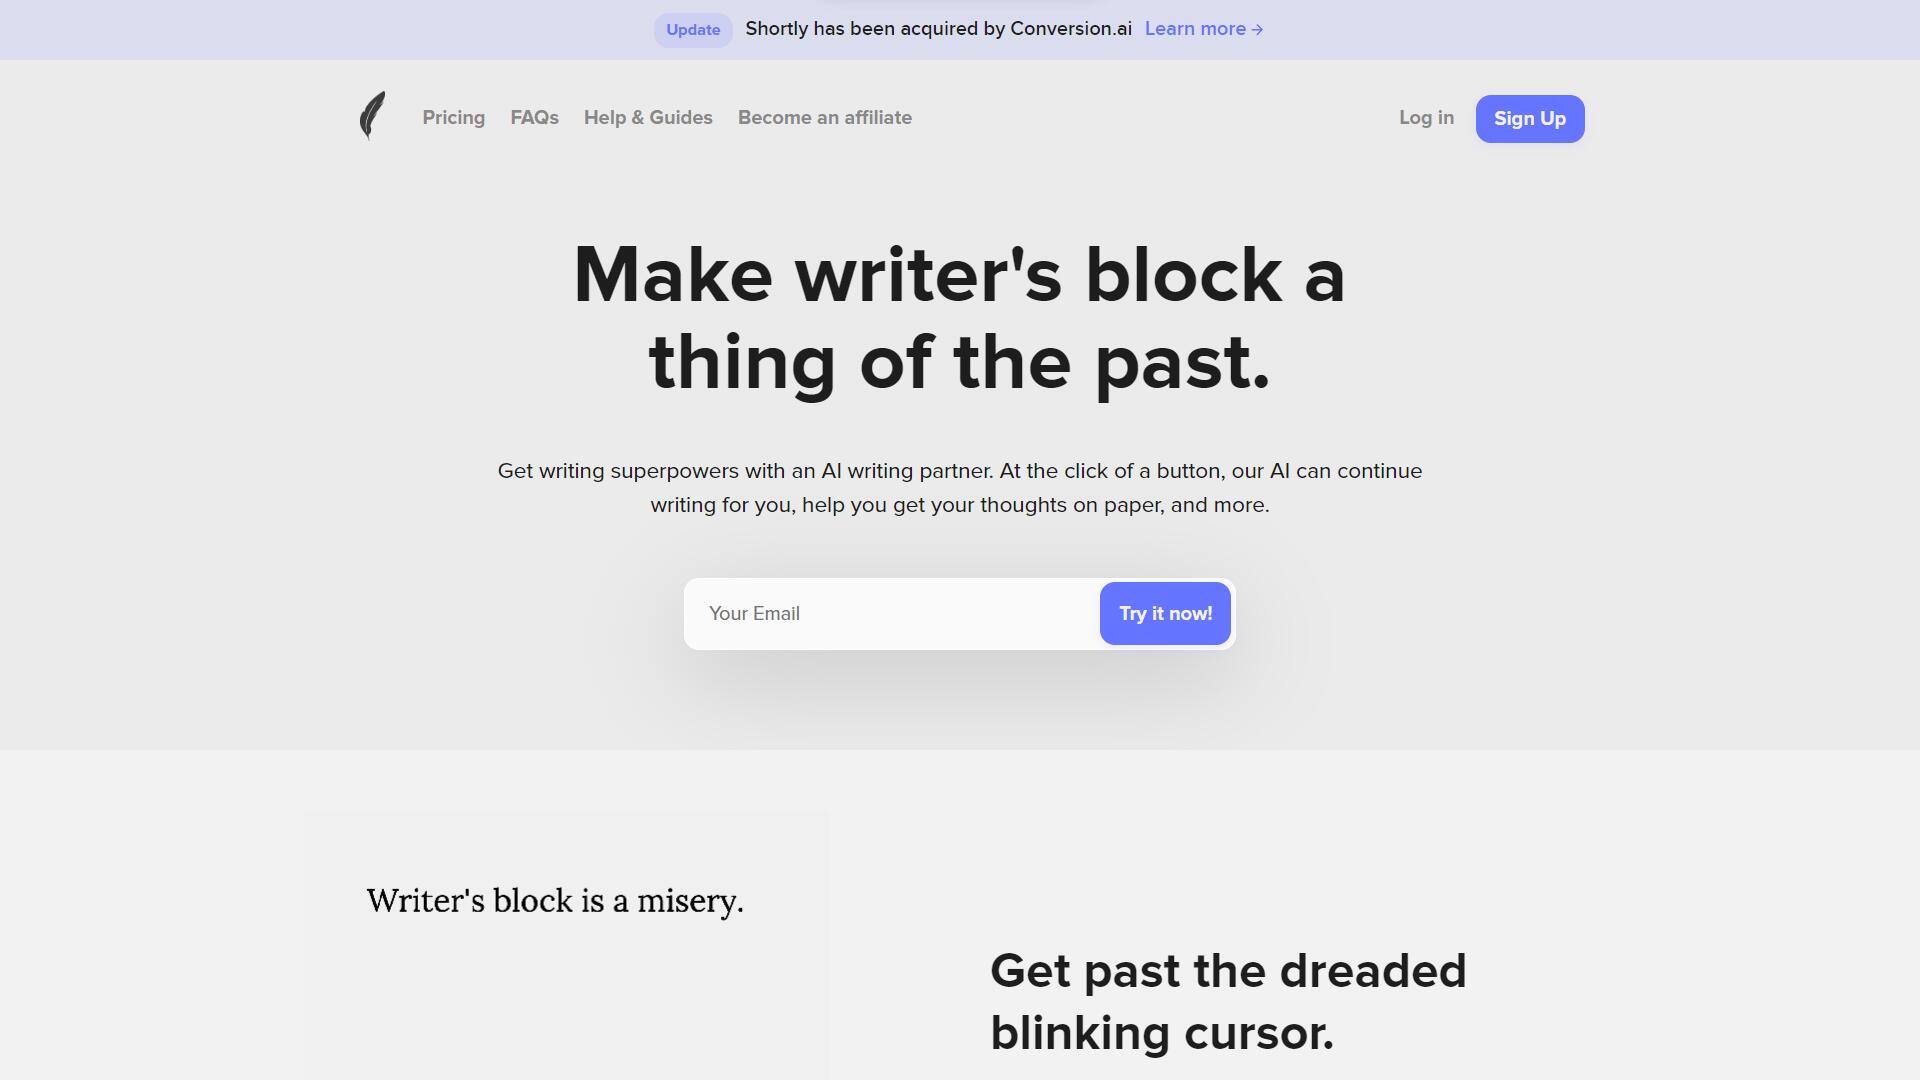 ShortlyAI - Your AI-Powered Writing Assistant